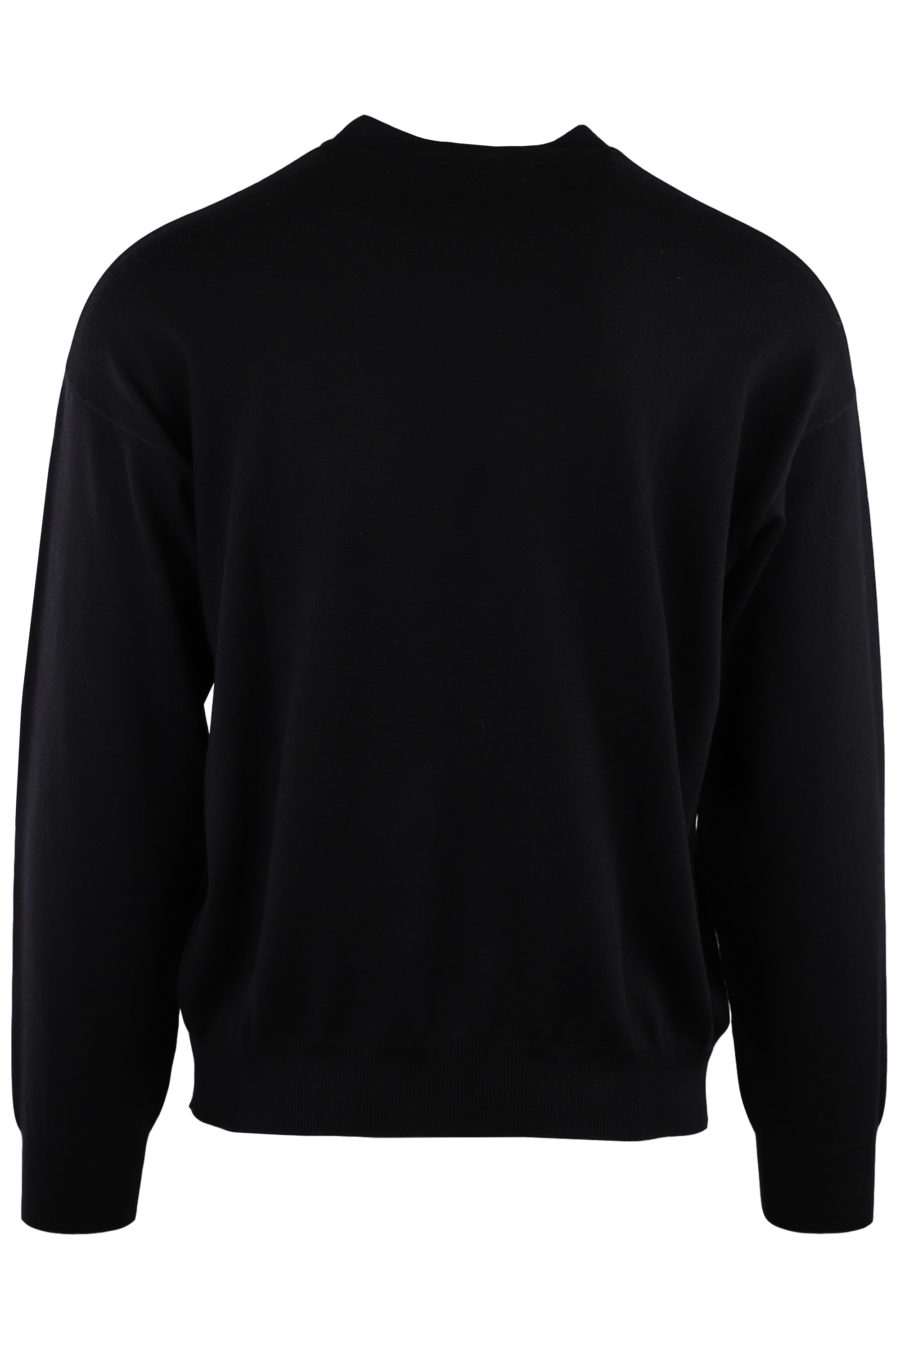 Black jumper with "teddy" logo with glasses - 0f337e2a55a1207ce0cd7db2646a4c7d79dd0220